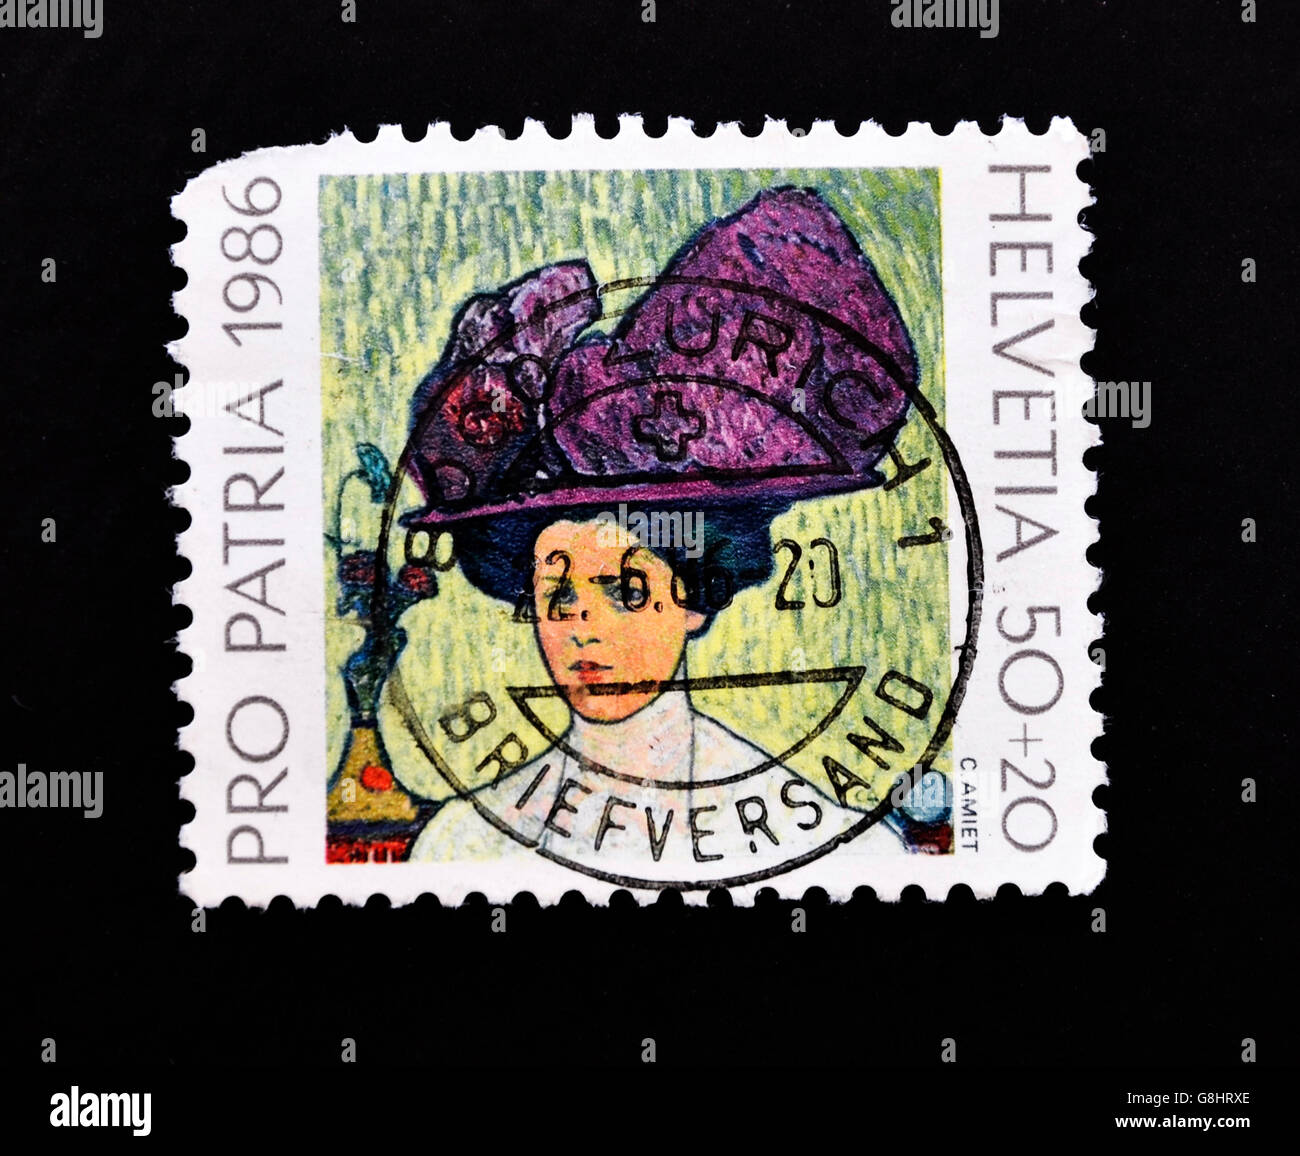 SWITZERLAND - CIRCA 1986: A stamp printed in Switzerland showing the painting of a woman wearing a hat made by the painter C. Am Stock Photo